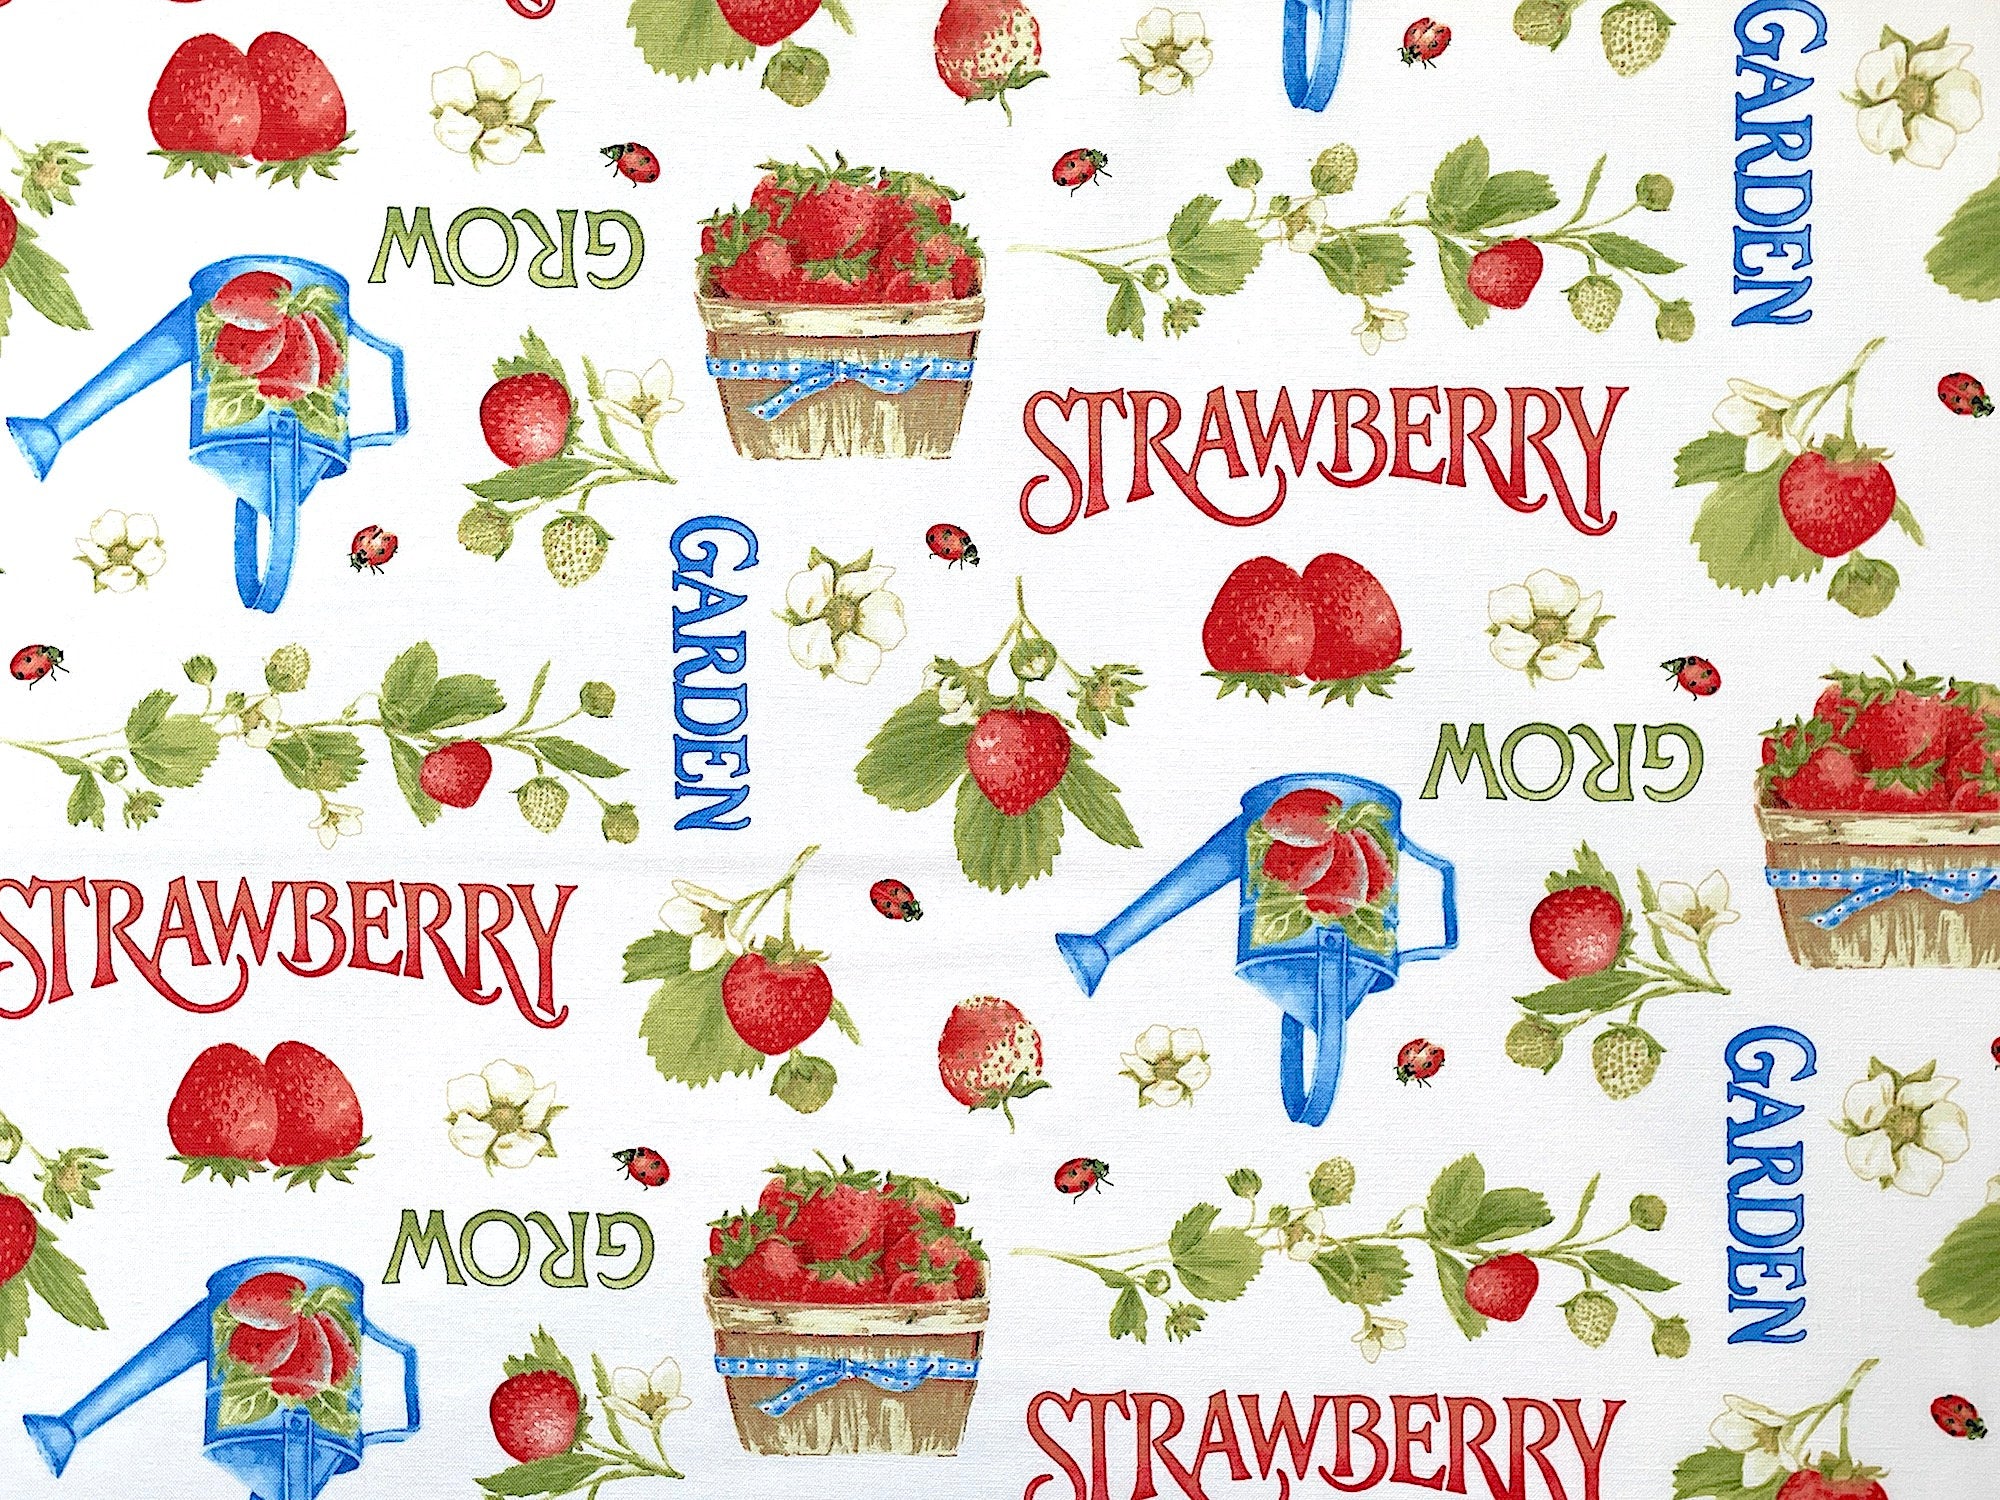 White cotton fabric covered with baskets of strawberries, watering cans and words such as garden grow and strawberry.